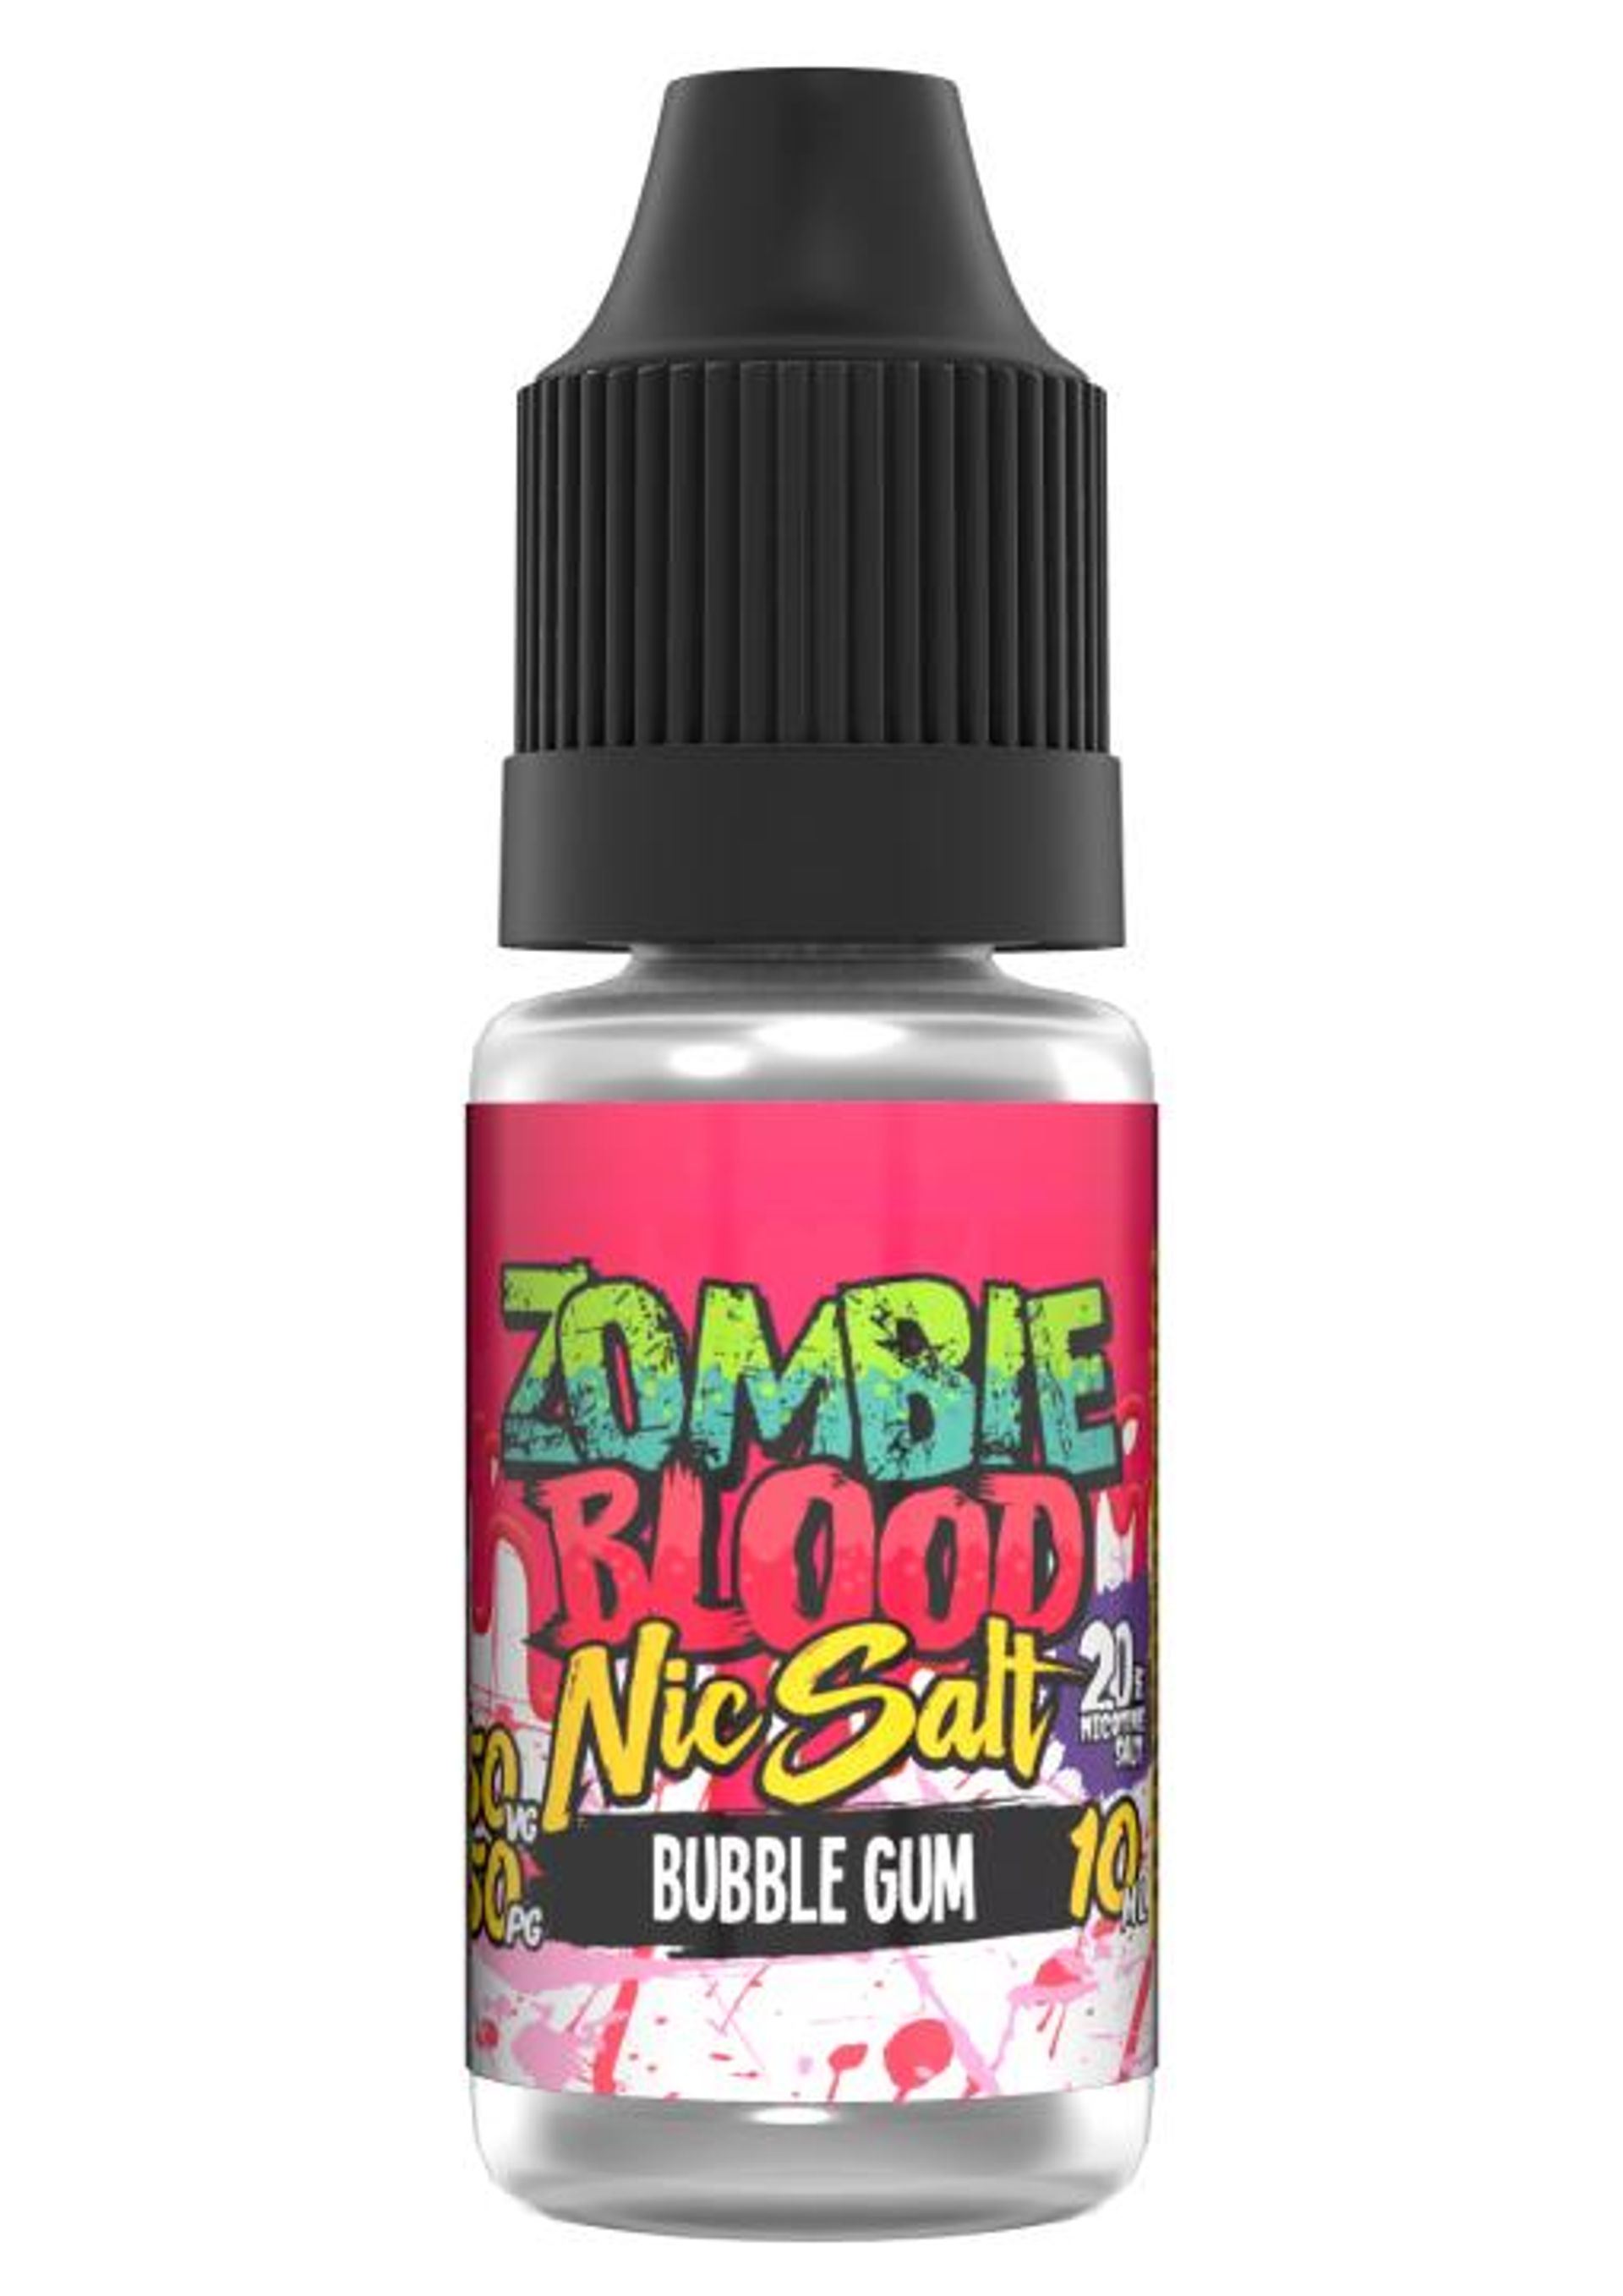 Image of Bubblegum by Zombie Blood